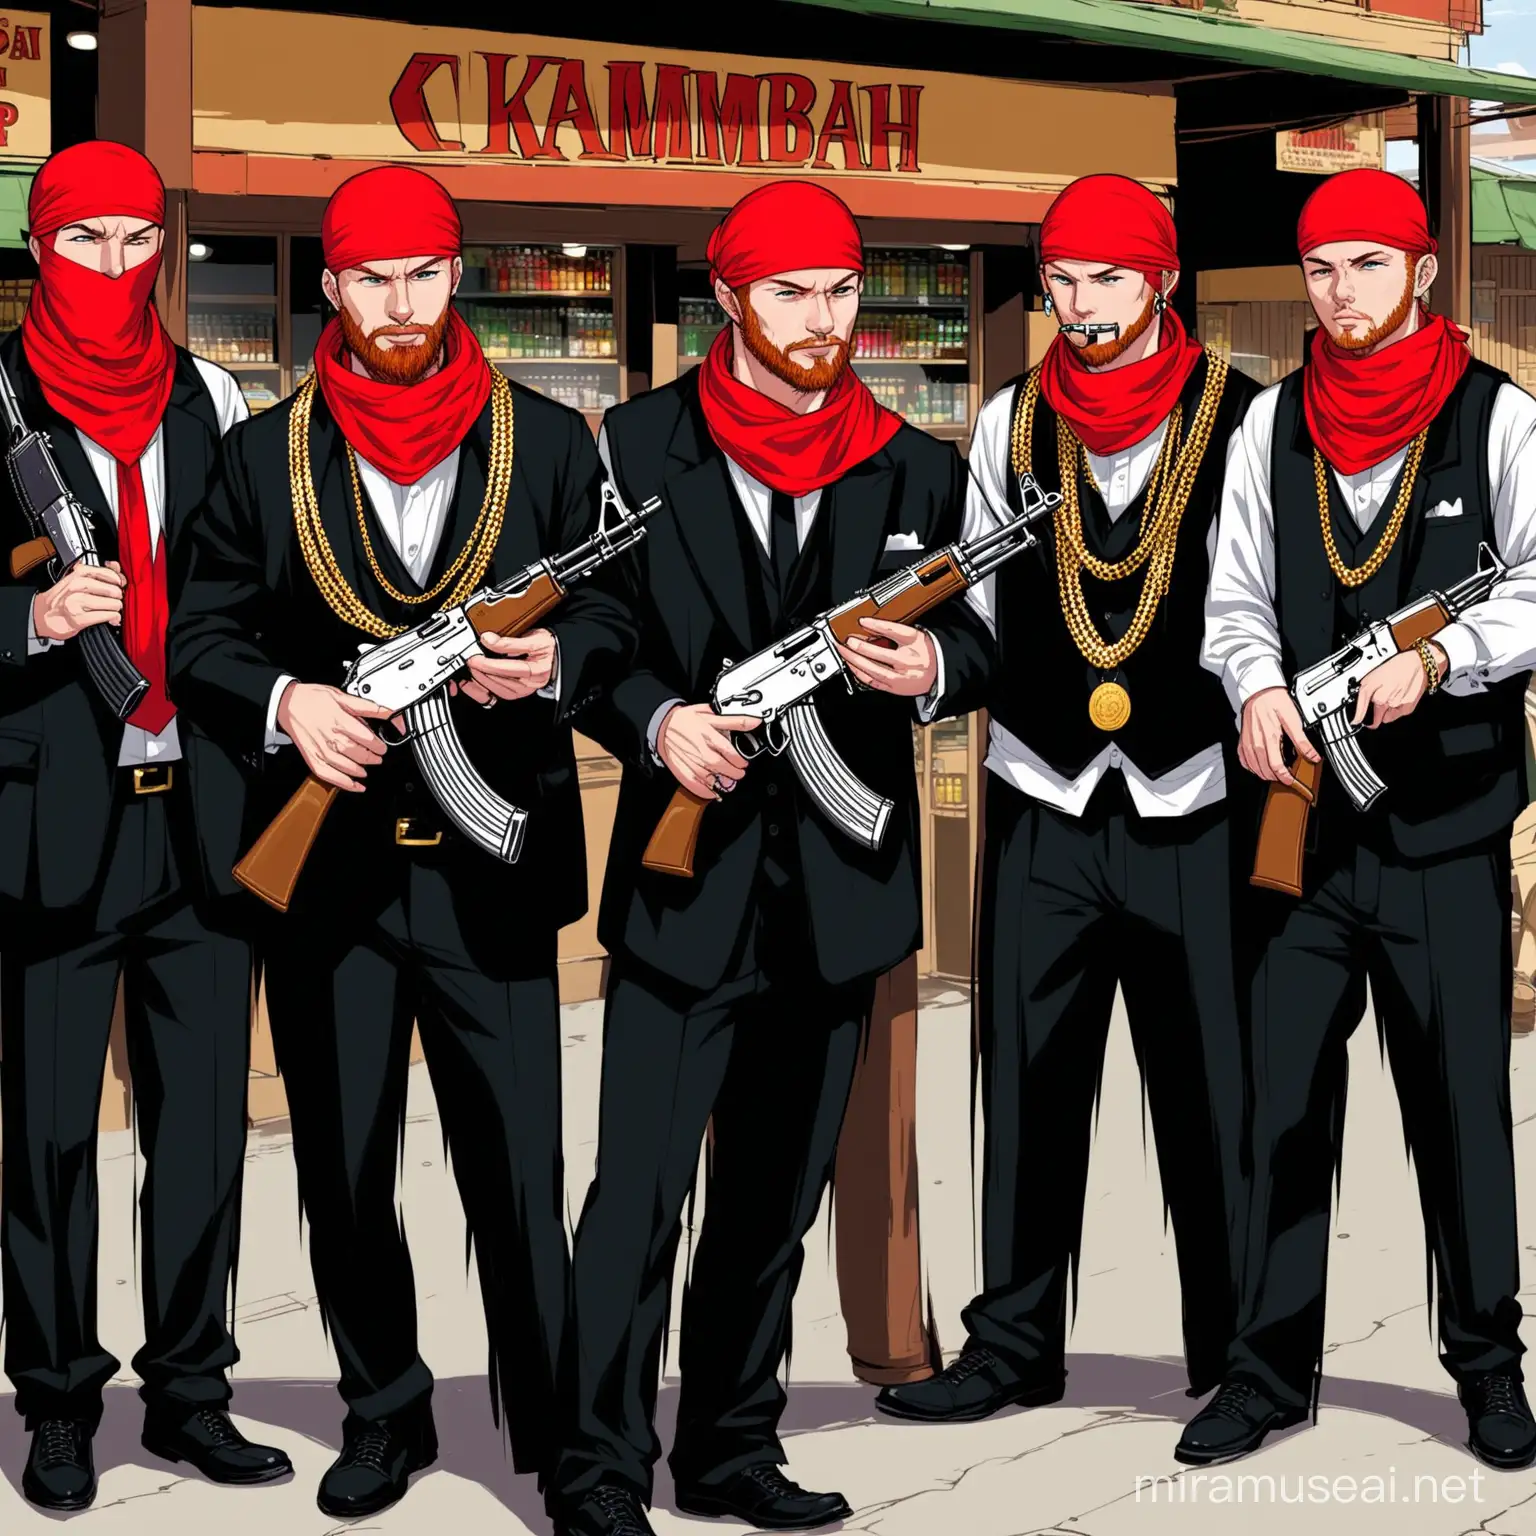 Irish Gangster with AK47s and Gold Chains at Kambah Shops